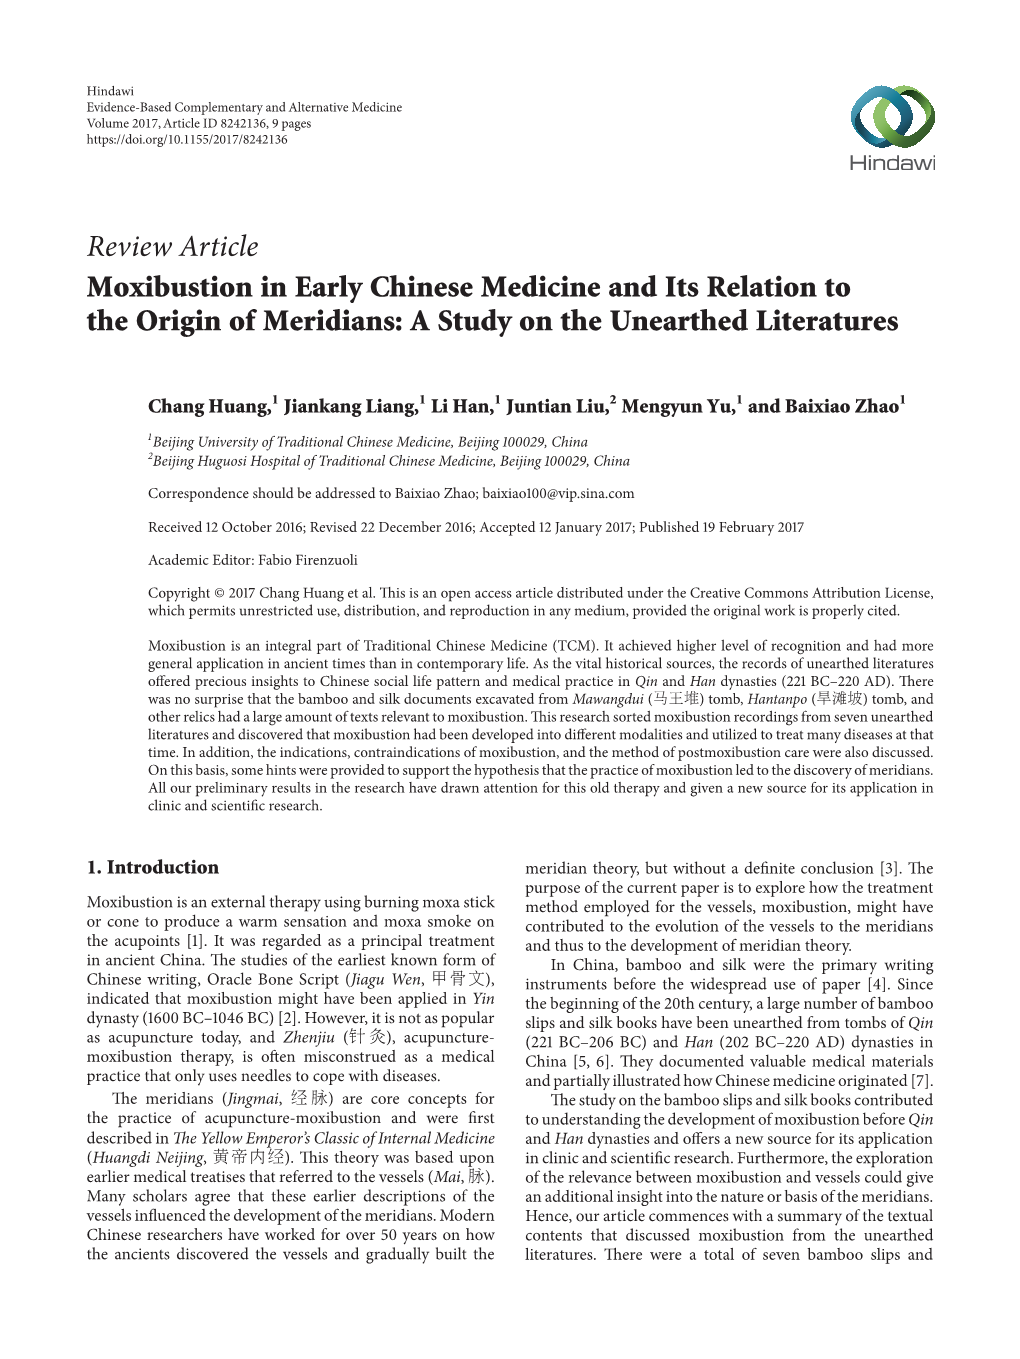 Moxibustion in Early Chinese Medicine and Its Relation to the Origin of Meridians: a Study on the Unearthed Literatures